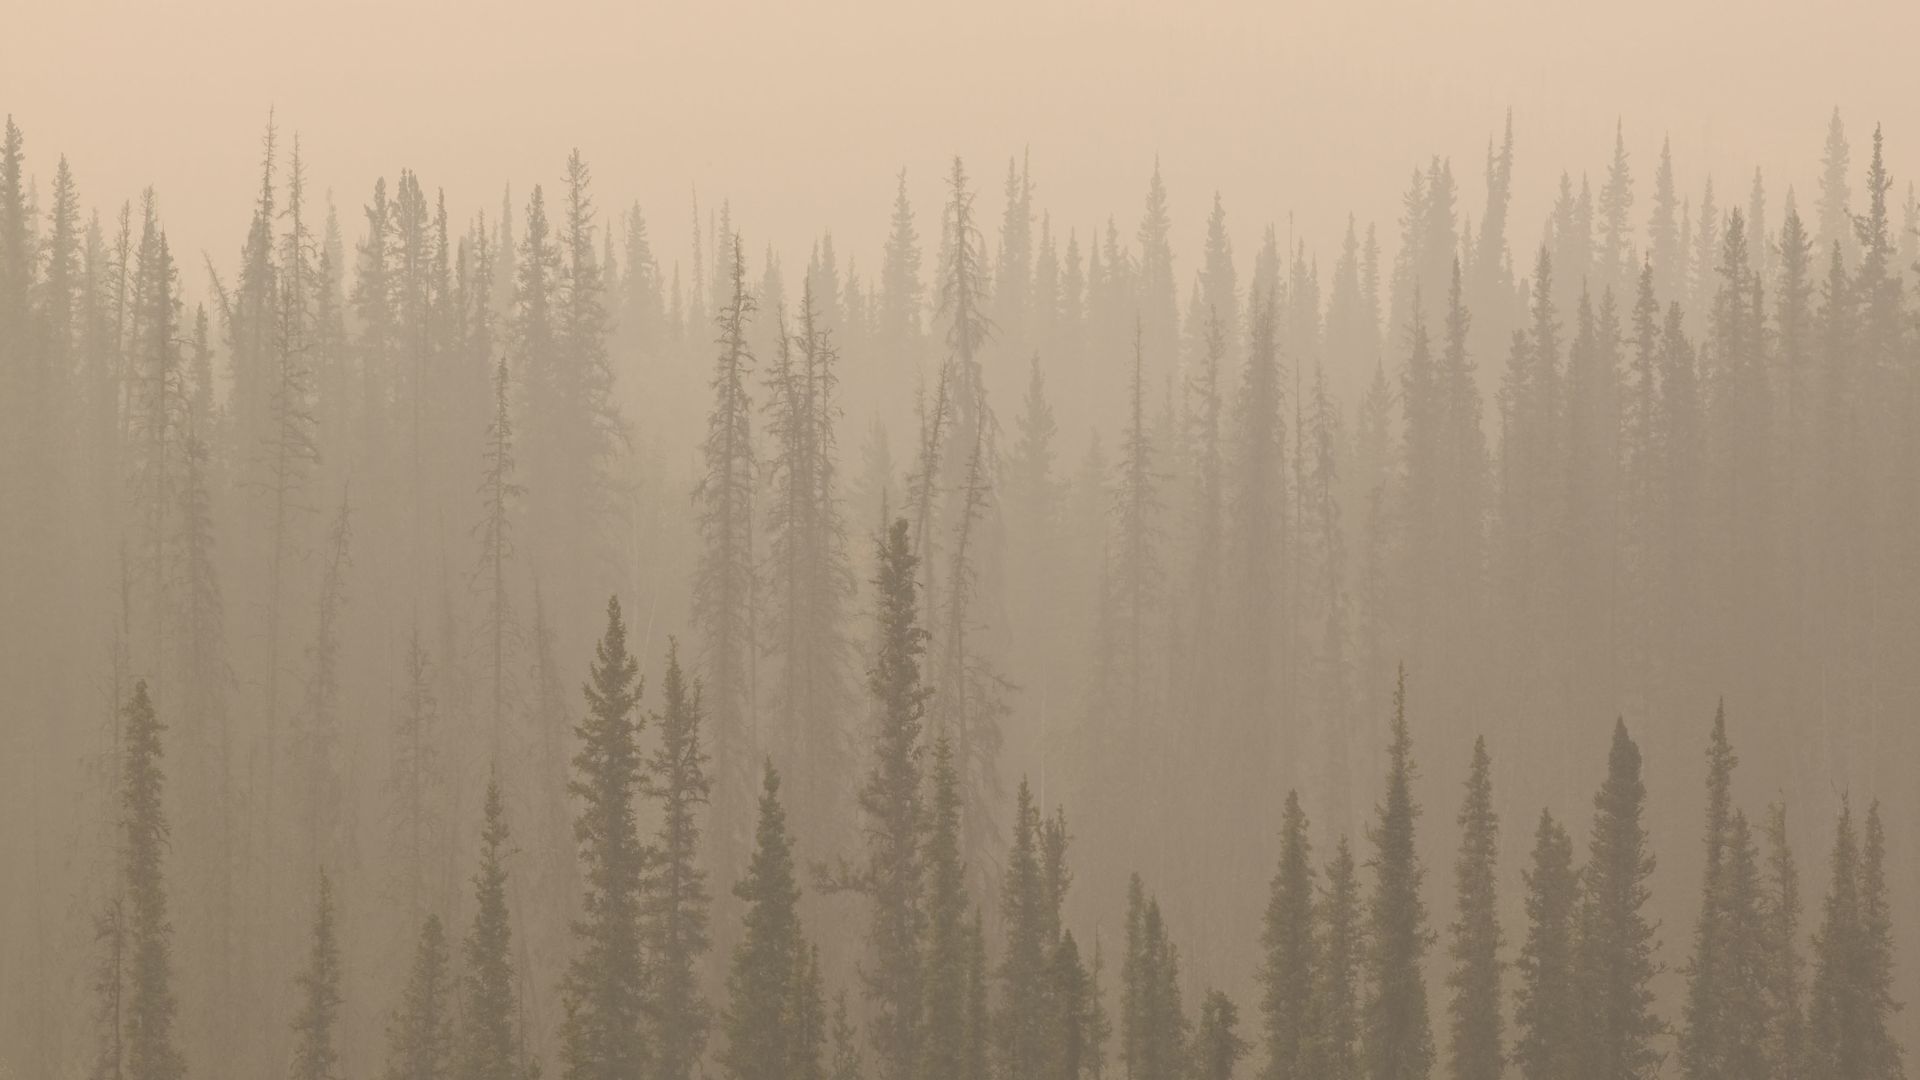 Black spruce forest in wildfire smoke